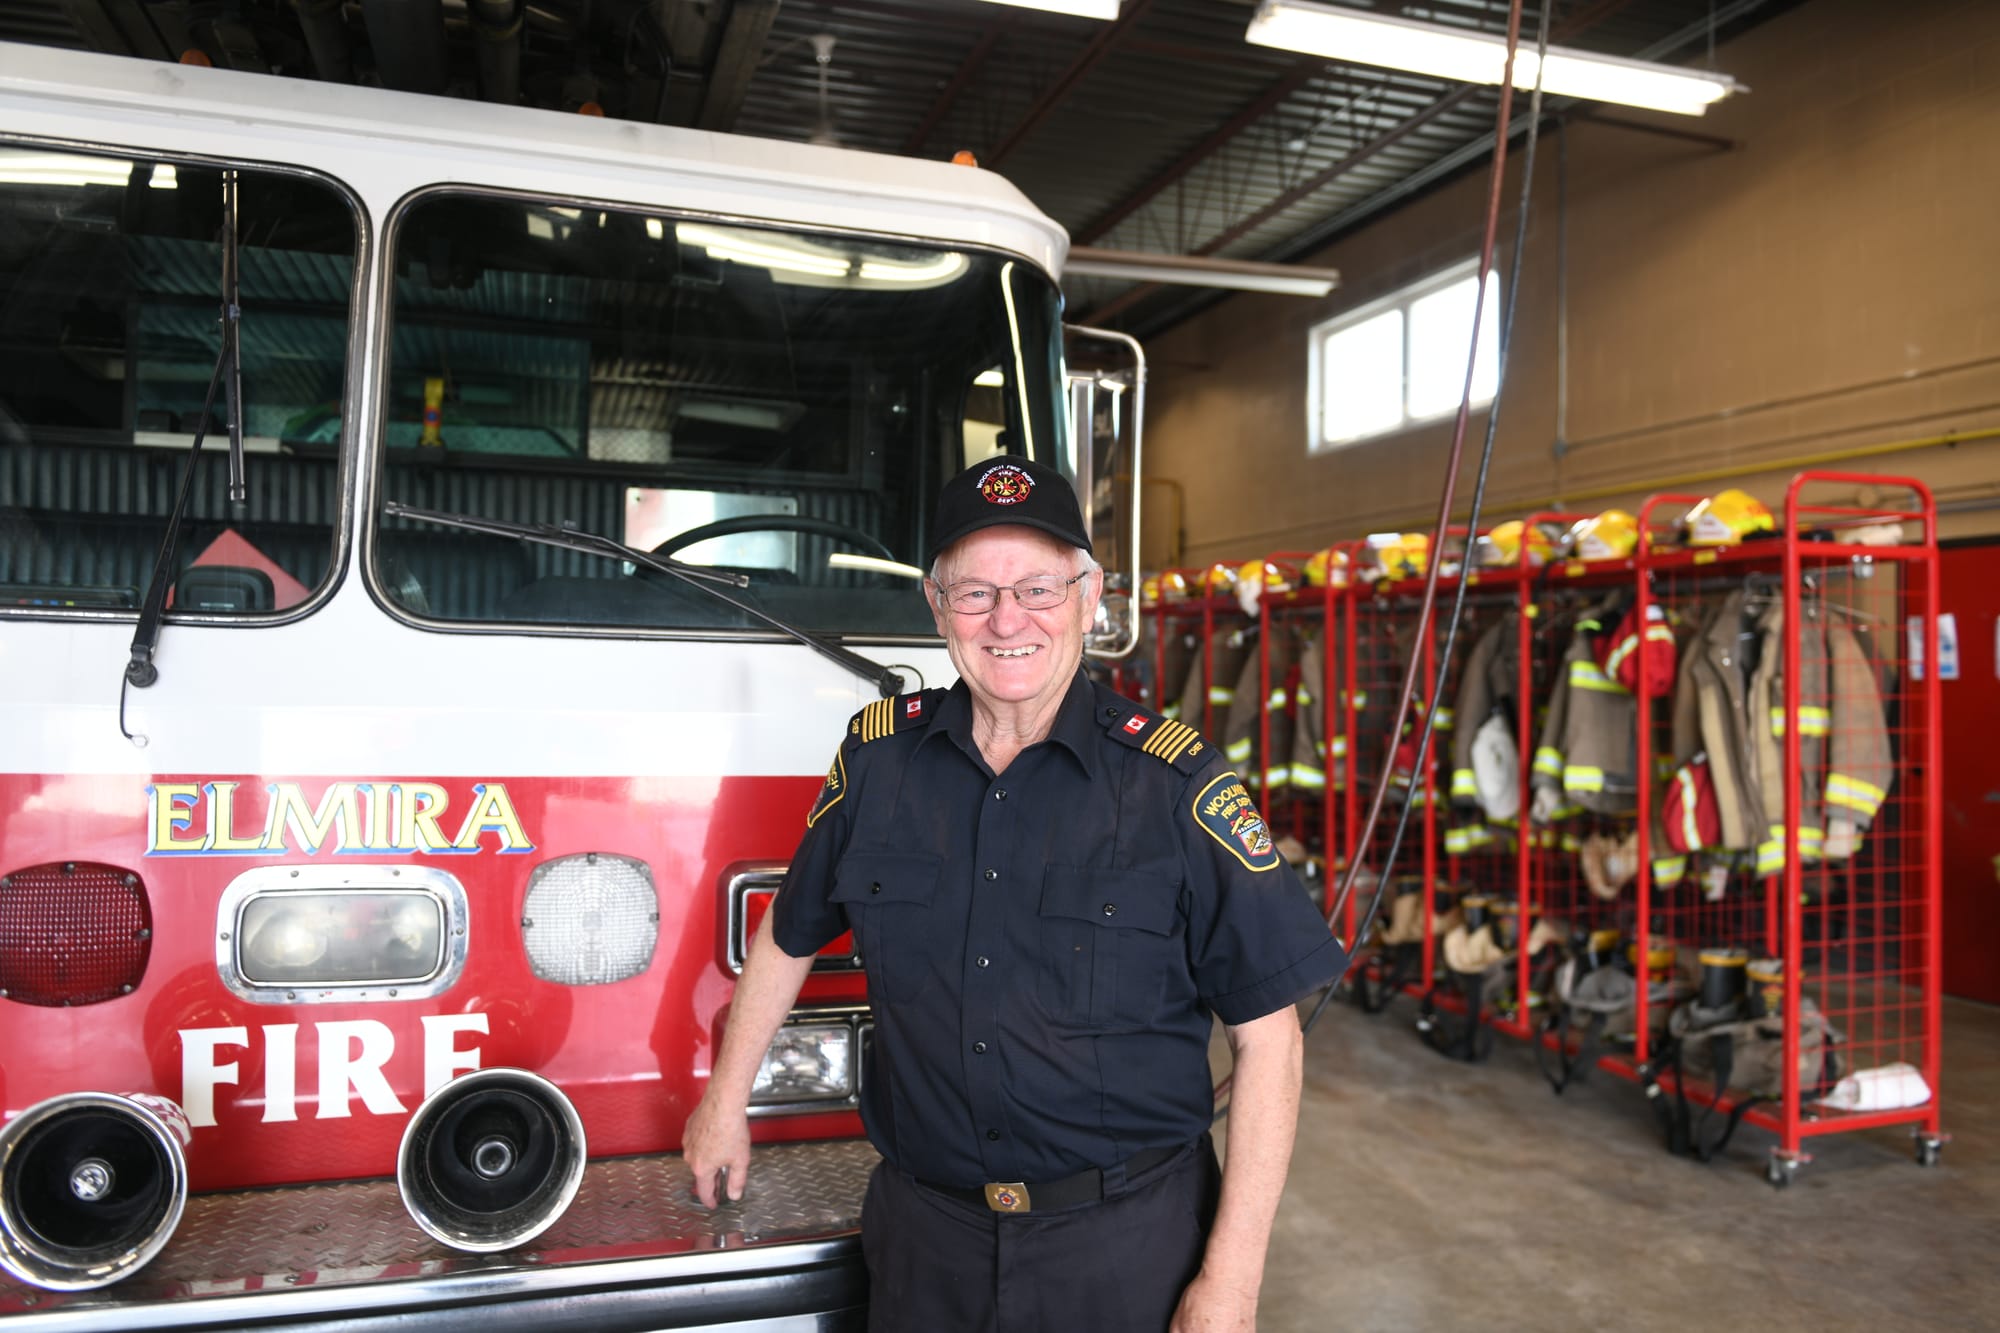 For him, firefighting had much to do with family